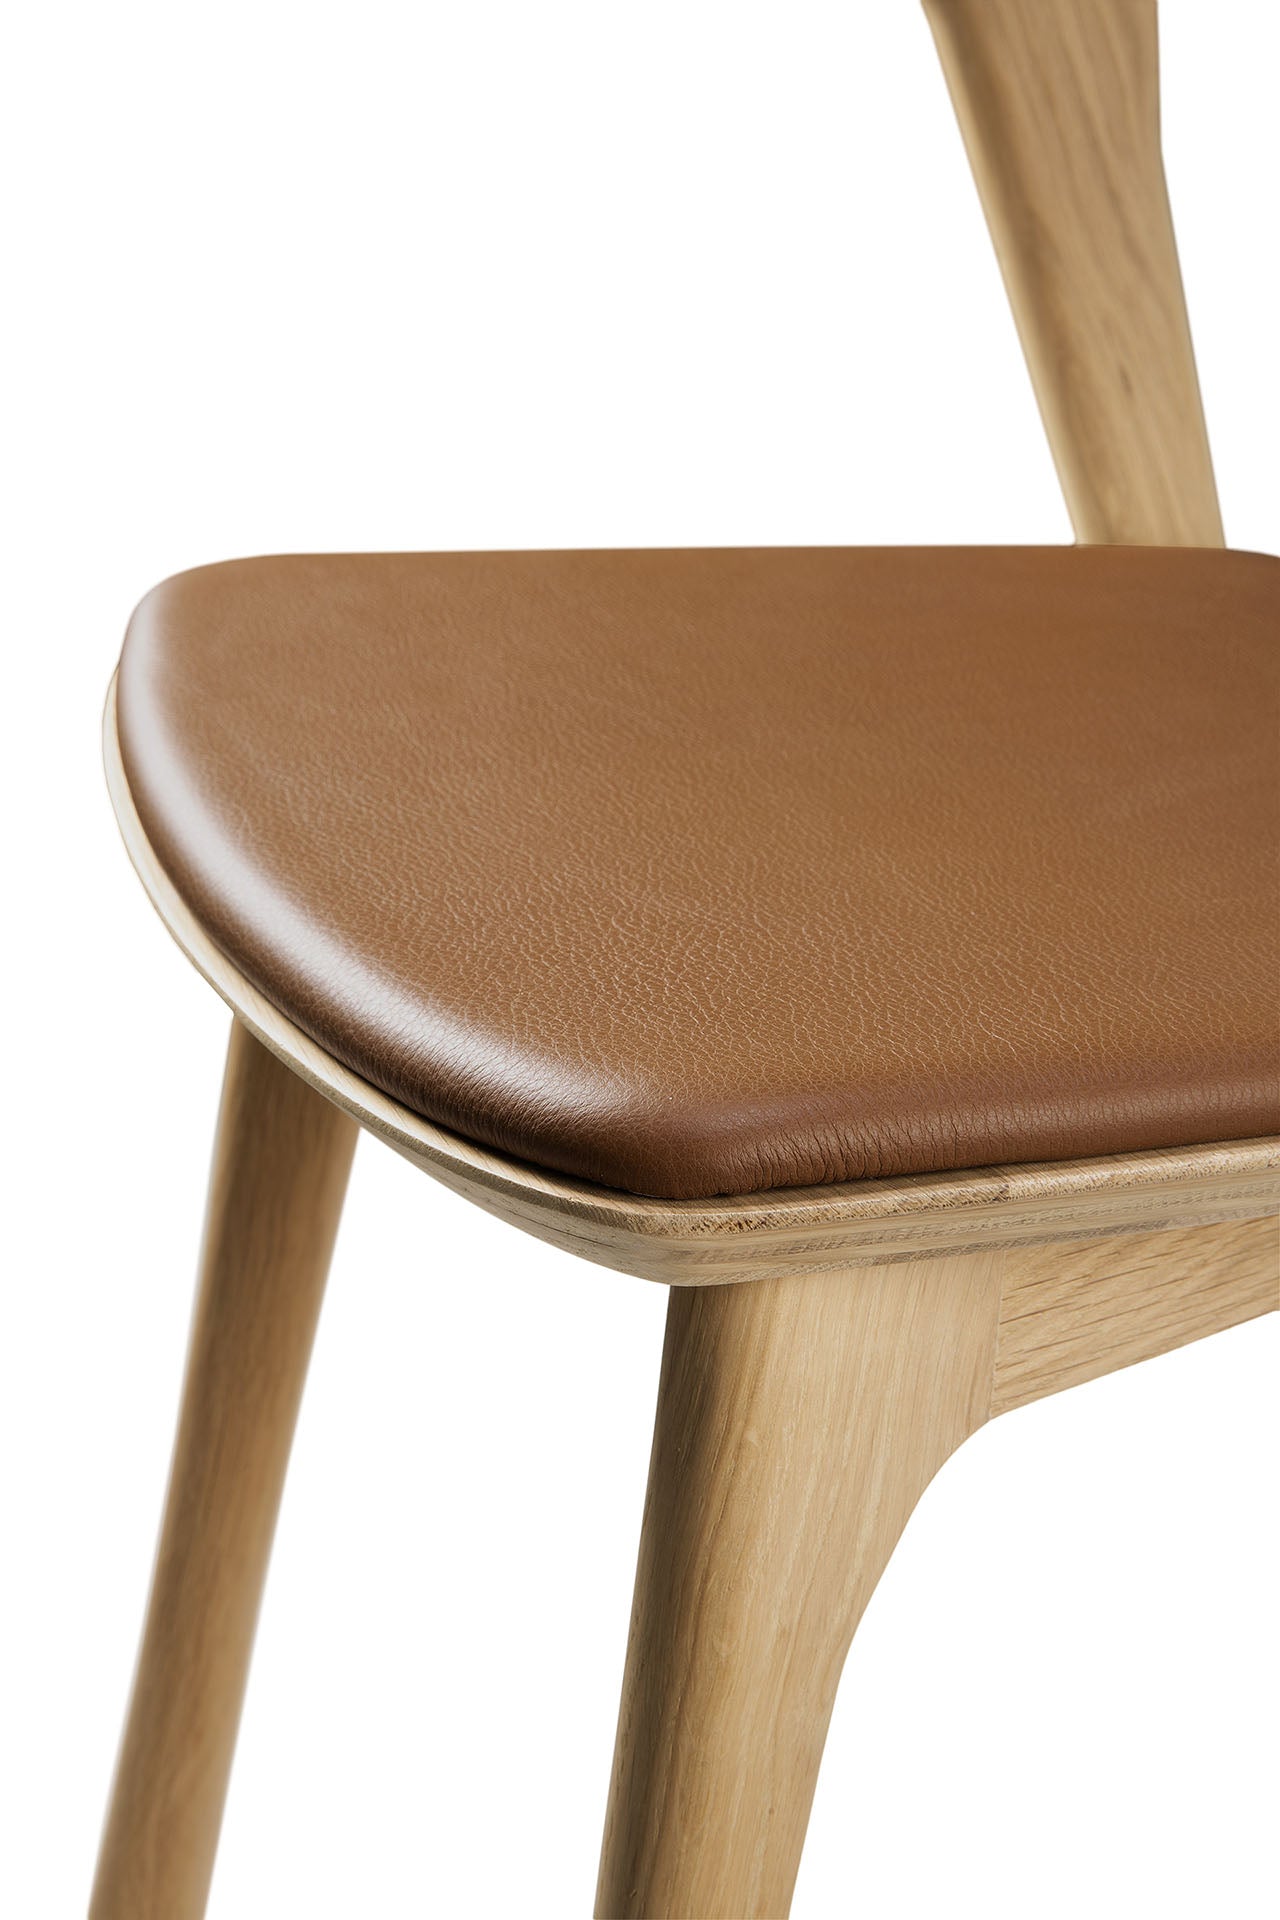 Ethnicraft Oak Bok Cognac Leather Dining Chair is available from Make Your House A Home, Bendigo, Victoria, Australia